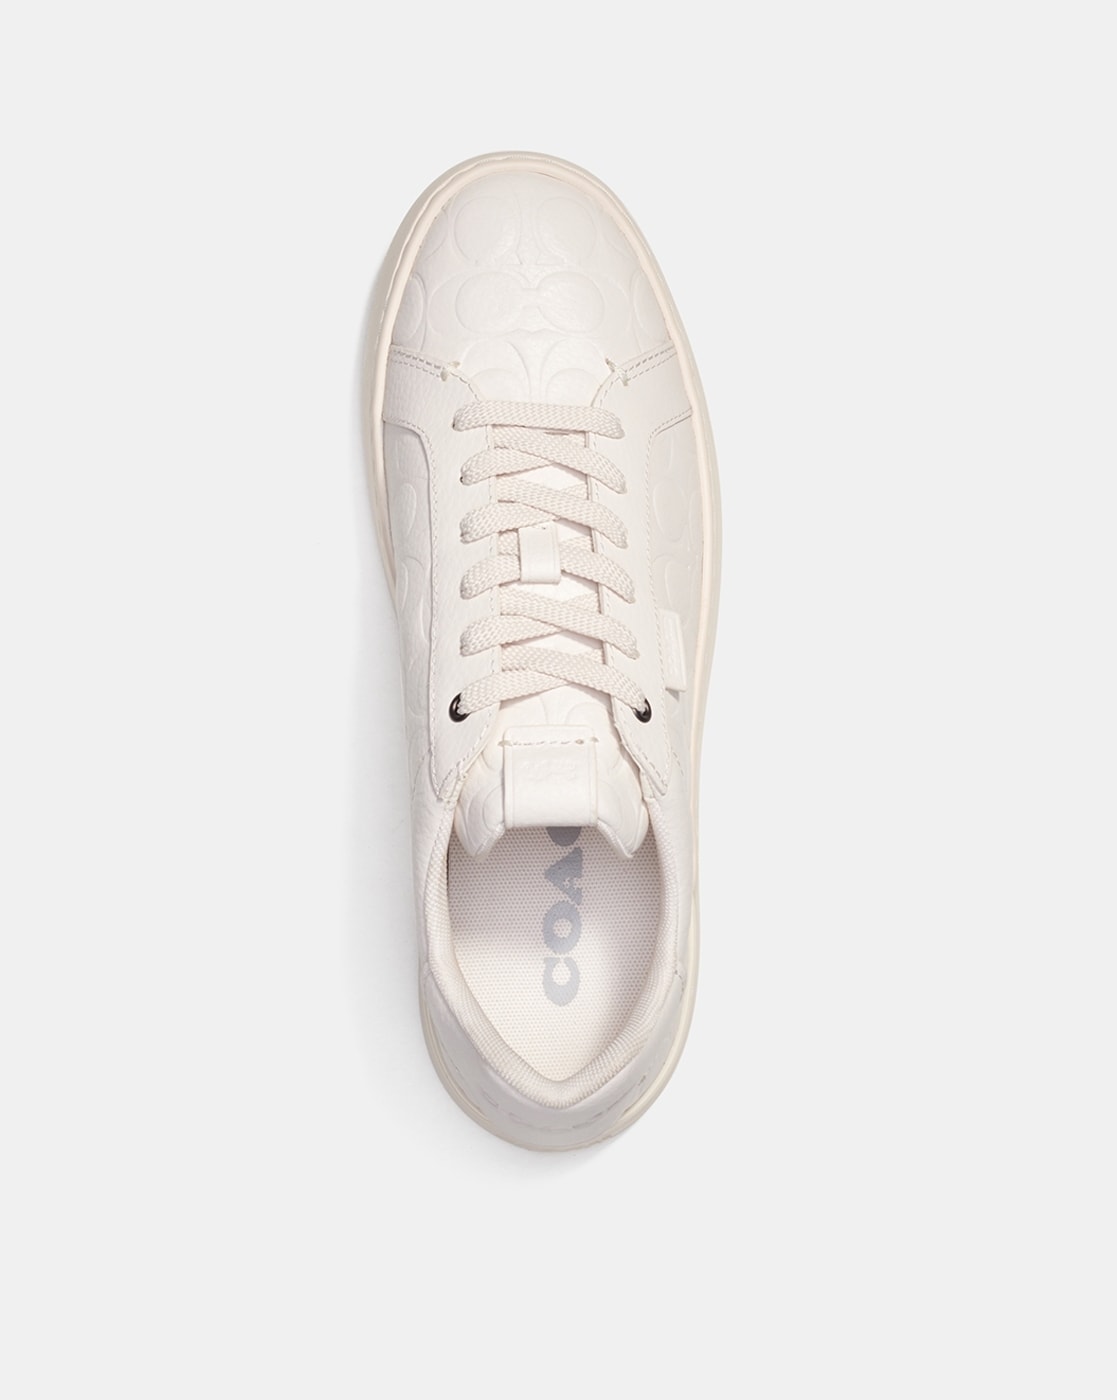 Classic White Leather Sneakers by Coach